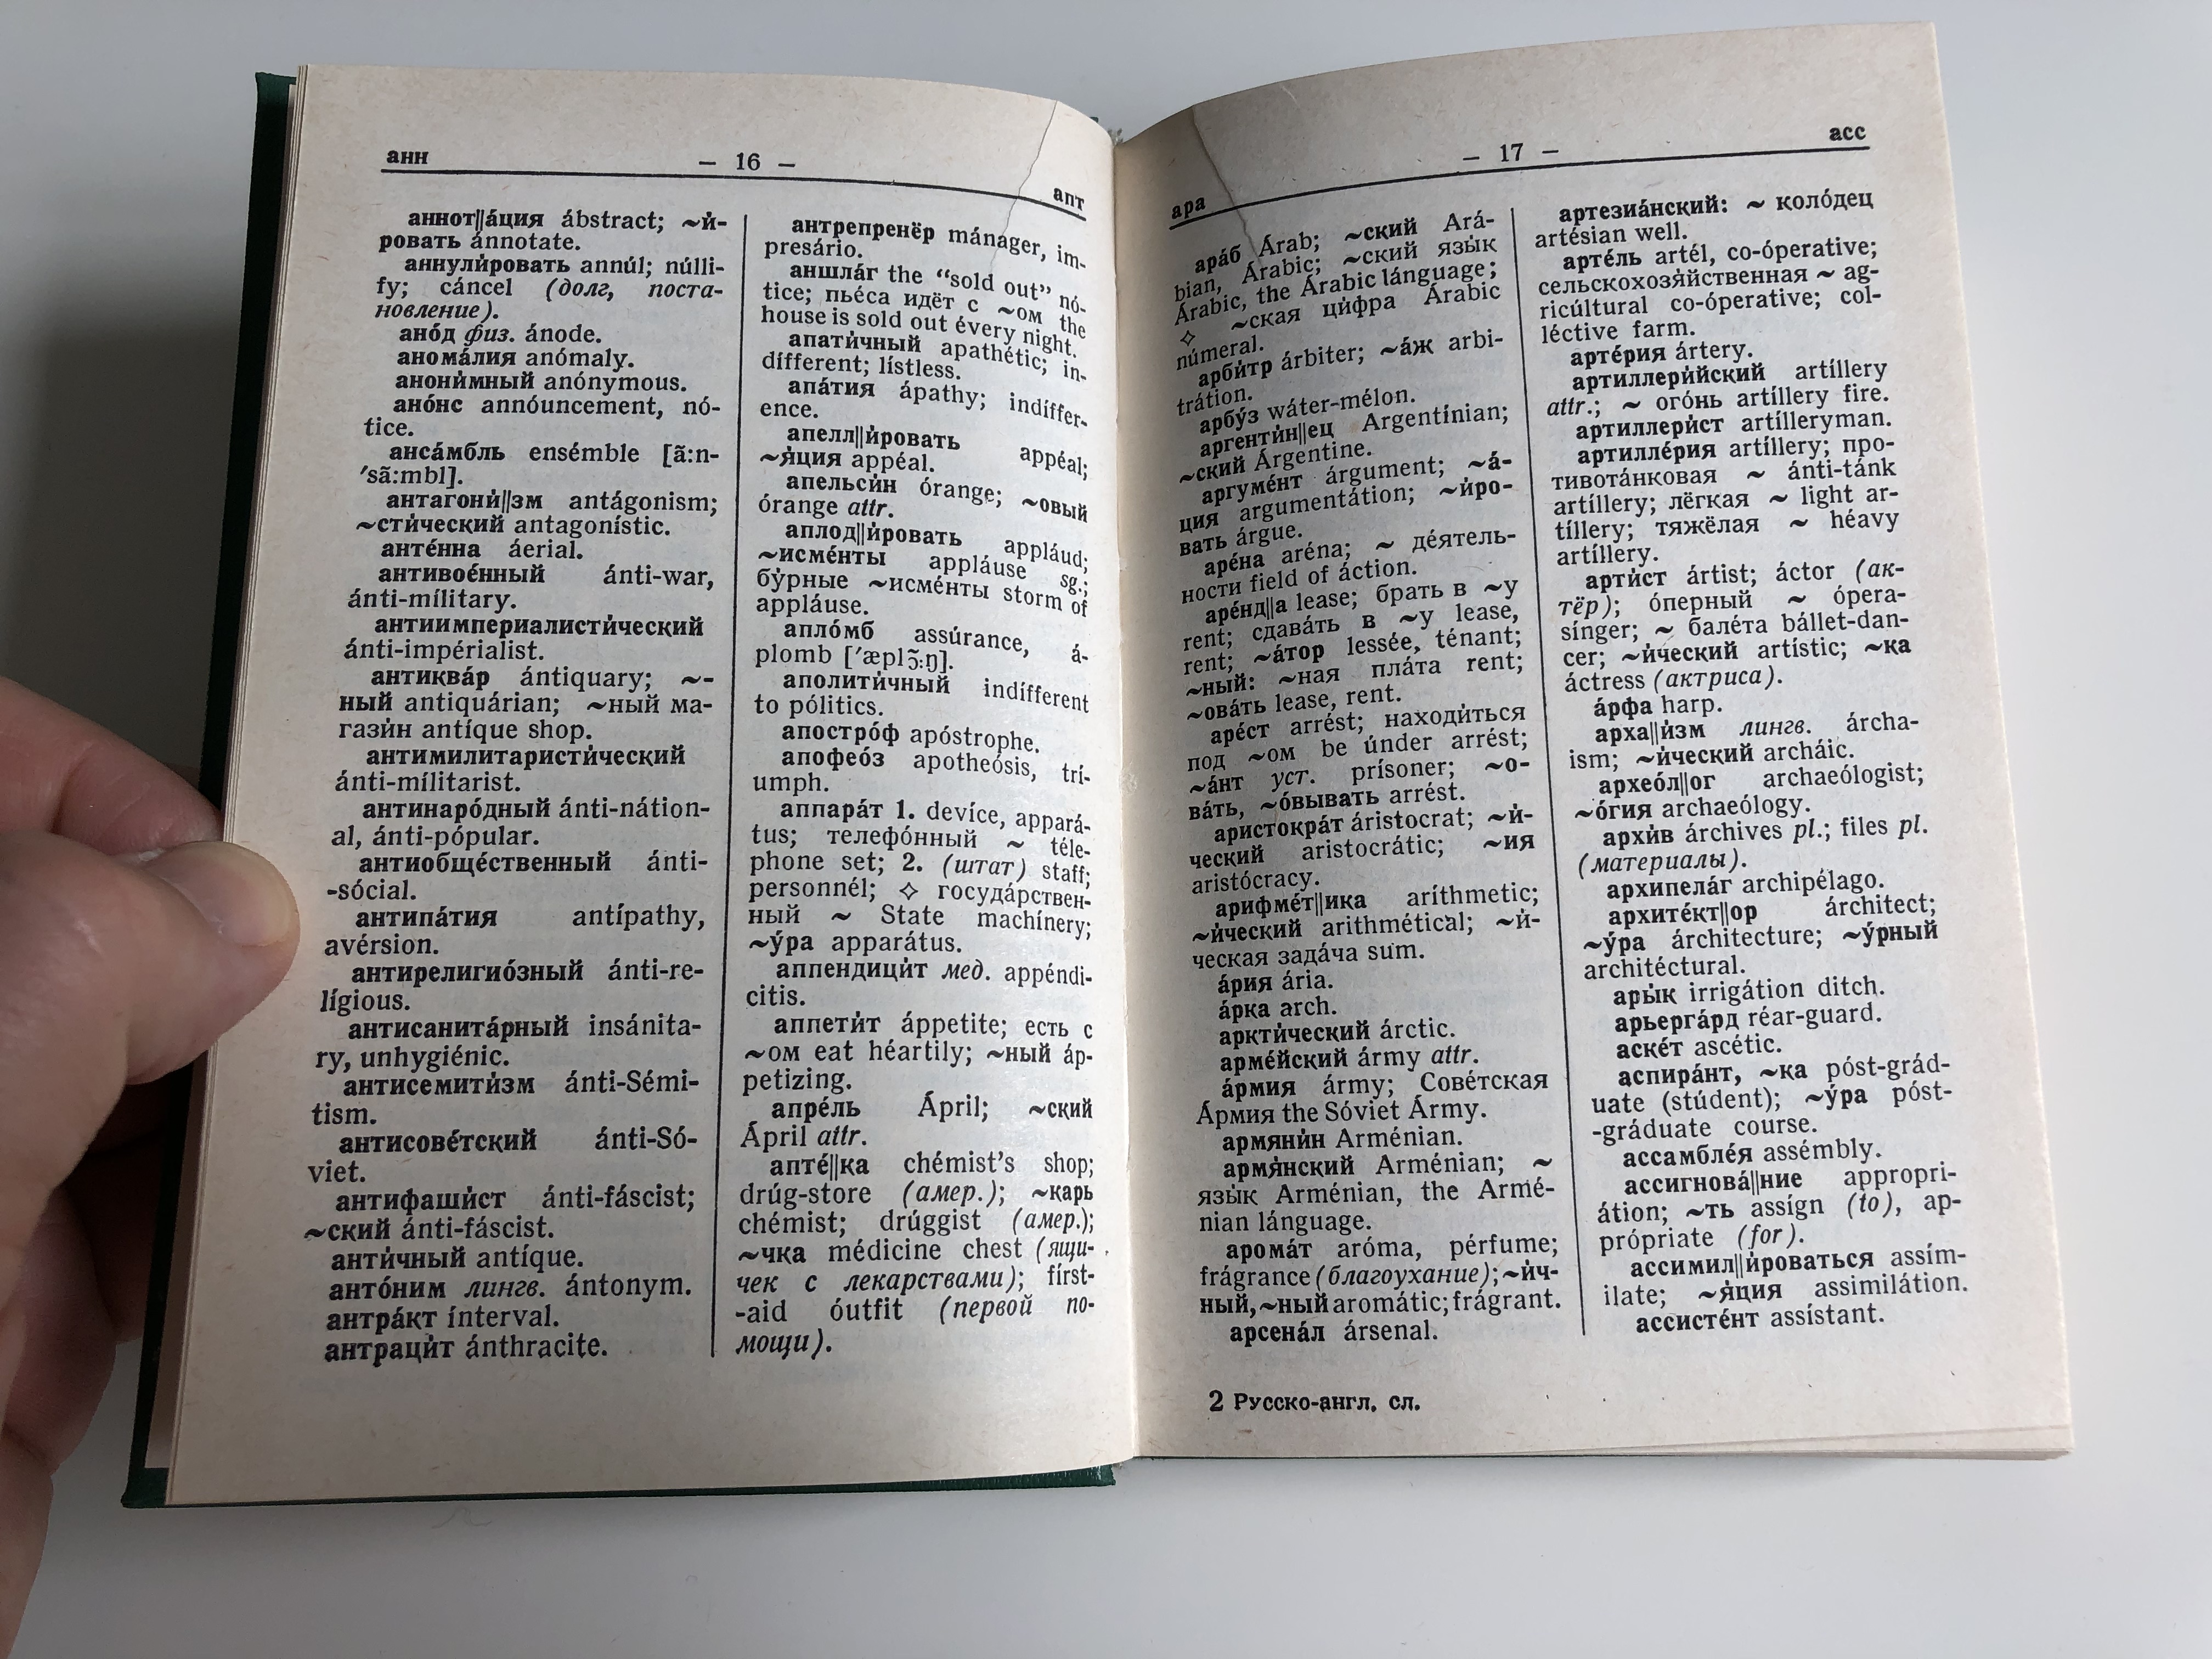 russian-english-dictionary-by-o.-s.-akhmanova-elizabeth-a.-m.-wilson-25000-words-approx.-25000-.-29th-stereotype-edition-moscow-1978-7-.jpg